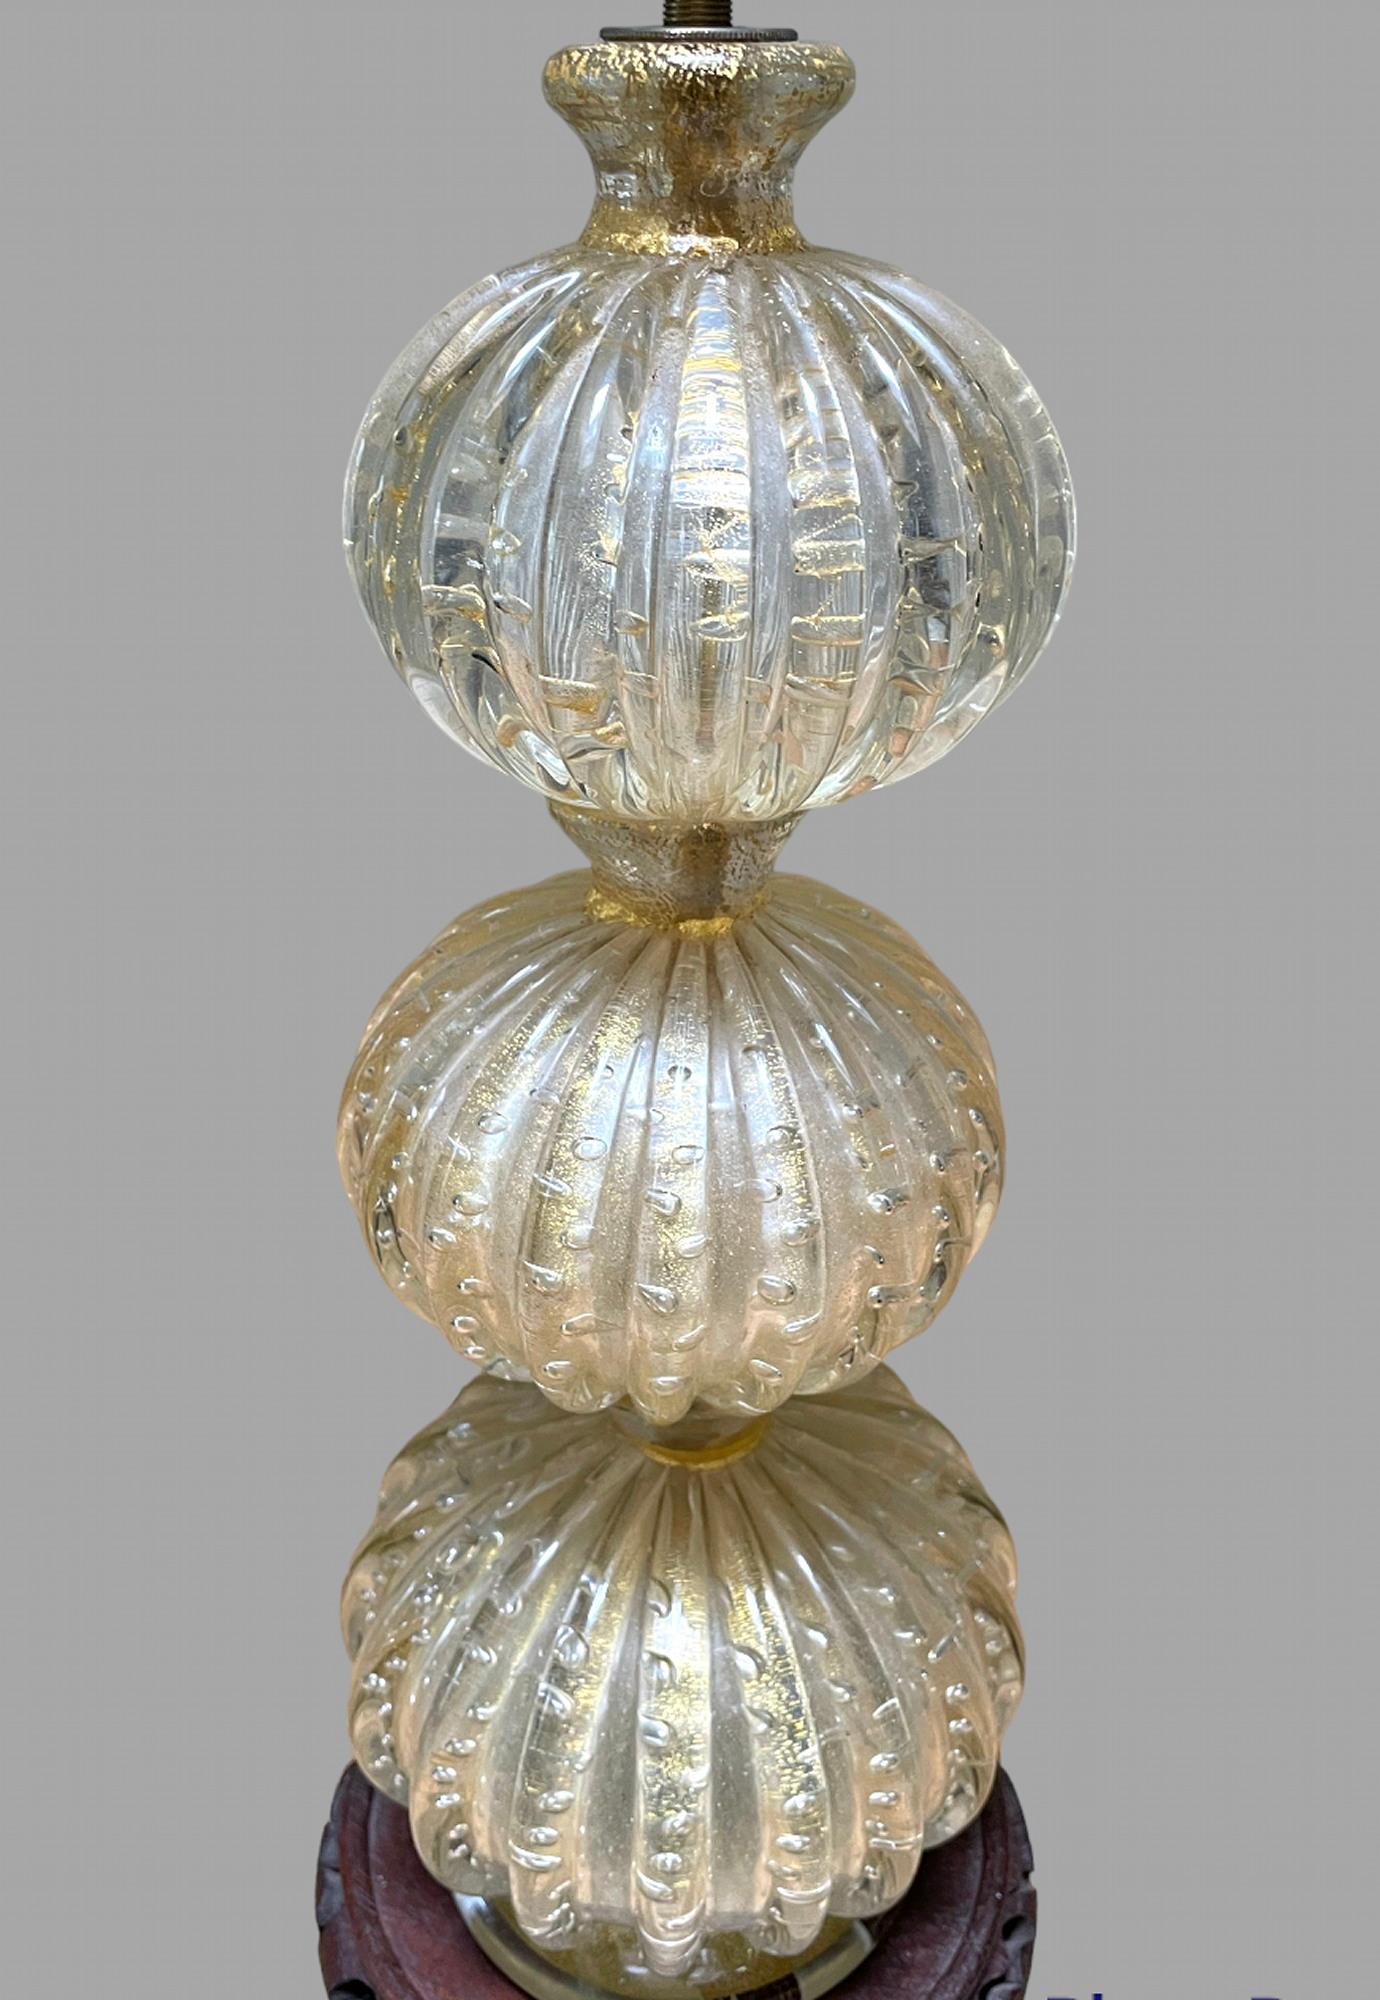 A very attractive three bubble murano lamp on a wooden base c1955. Pat Tested

Murano Glass is made on the island of Murano, located within the city of Venice in Northern Italy. This glass is made from silica, soda, lime and potassium melted